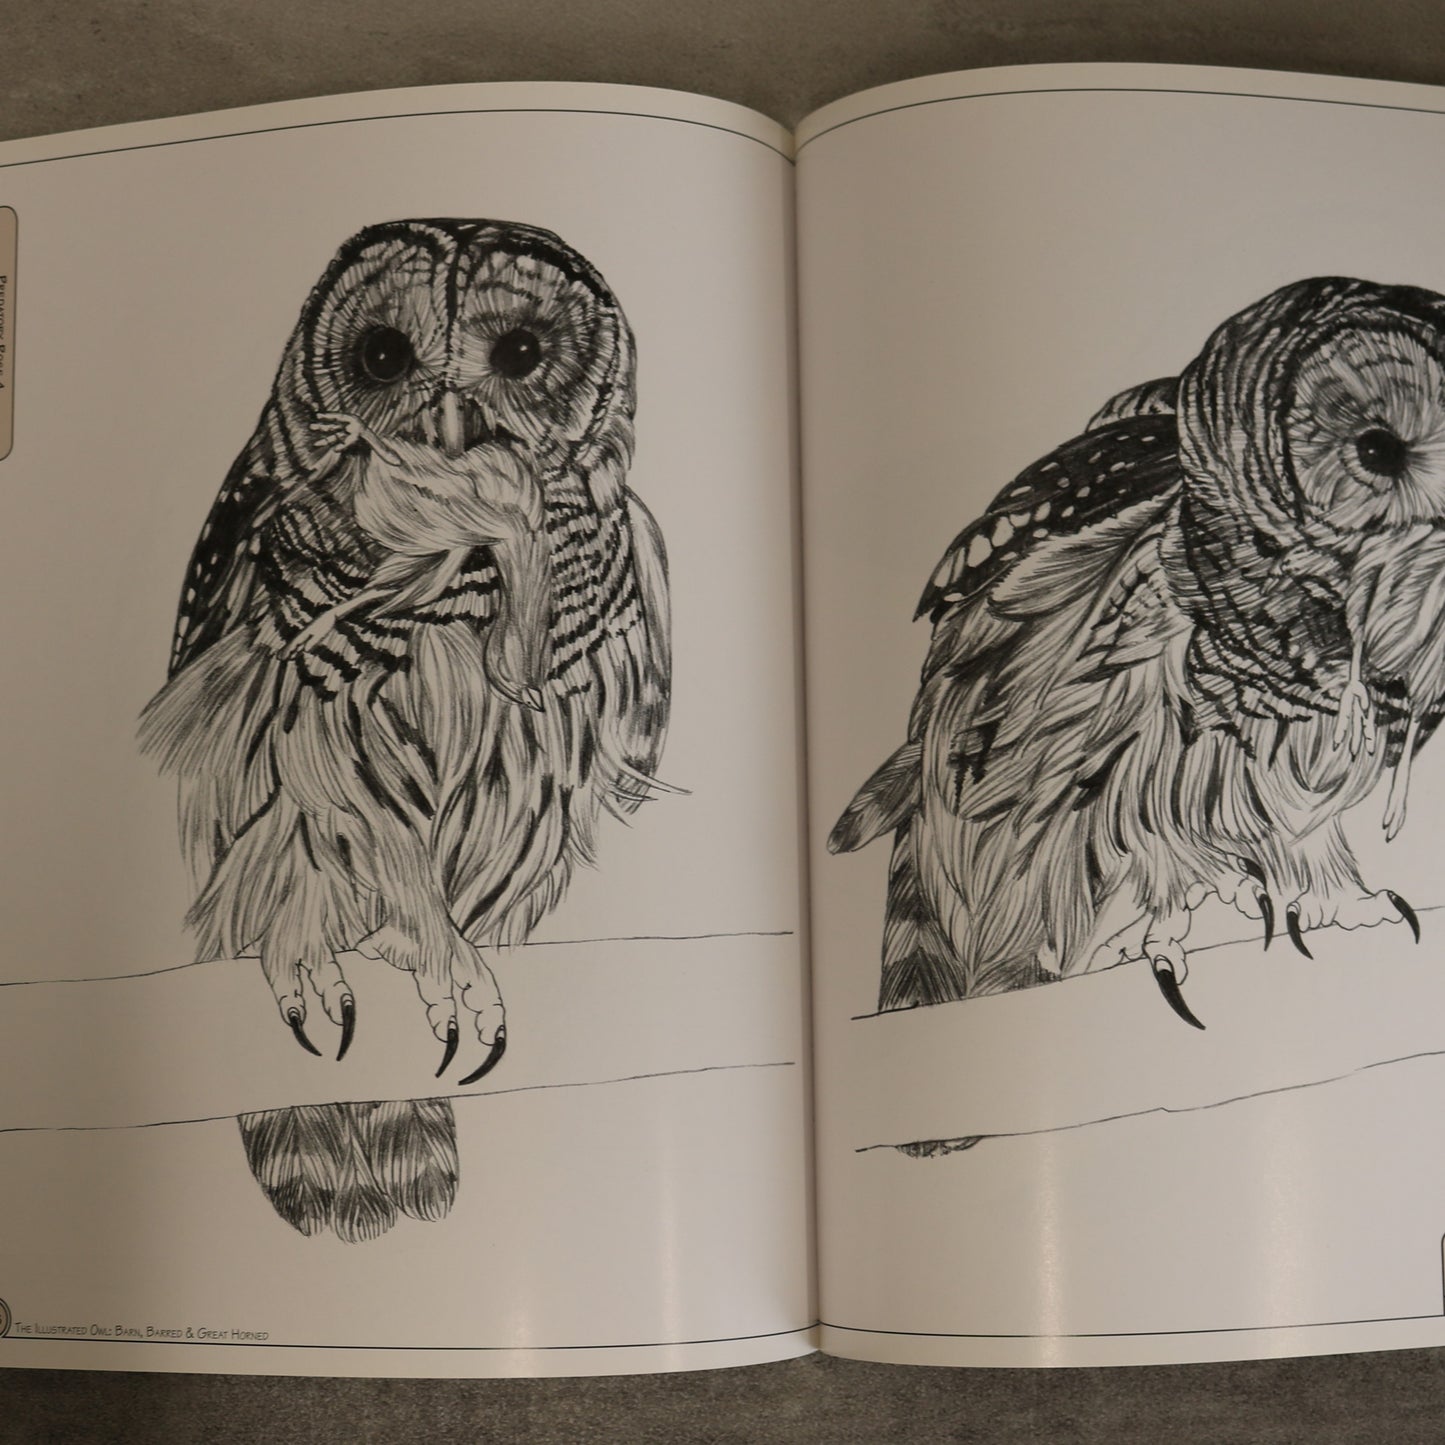 Illustrated Barn Barred Great Horned Owl Wood Carving Used Book